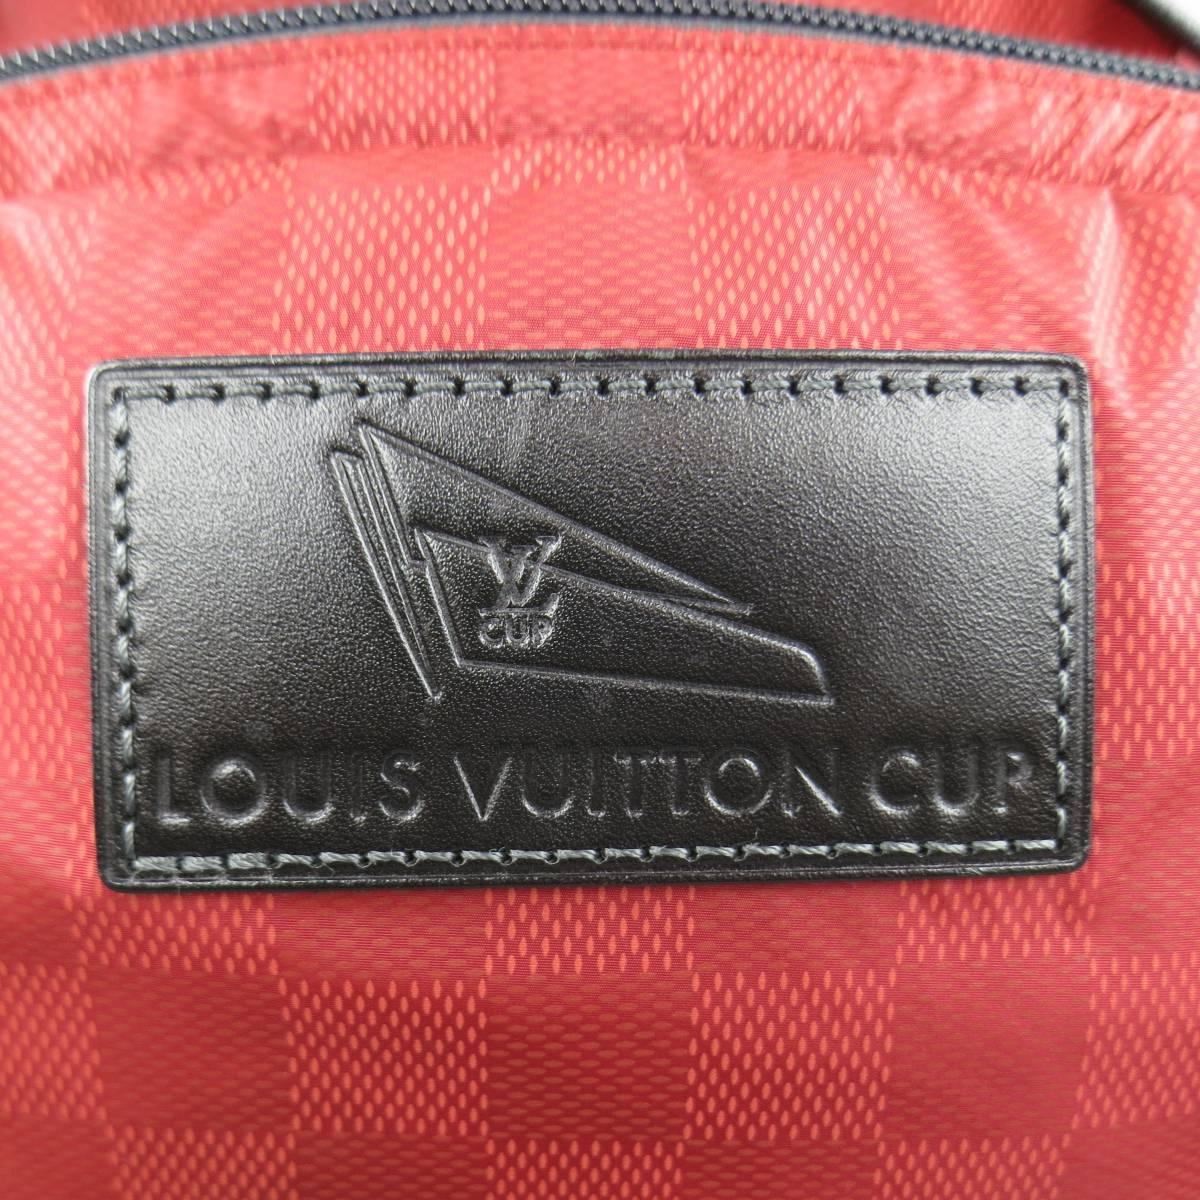 LOUIS VUITTON Cup 2012 backpack comes in a brick red Damier print nylon and features a frontal zip pocket with black embossed leather logo patch, side zip pocket, side handle, drawstring top with flap, and adjustable webbing straps. Wear throughout